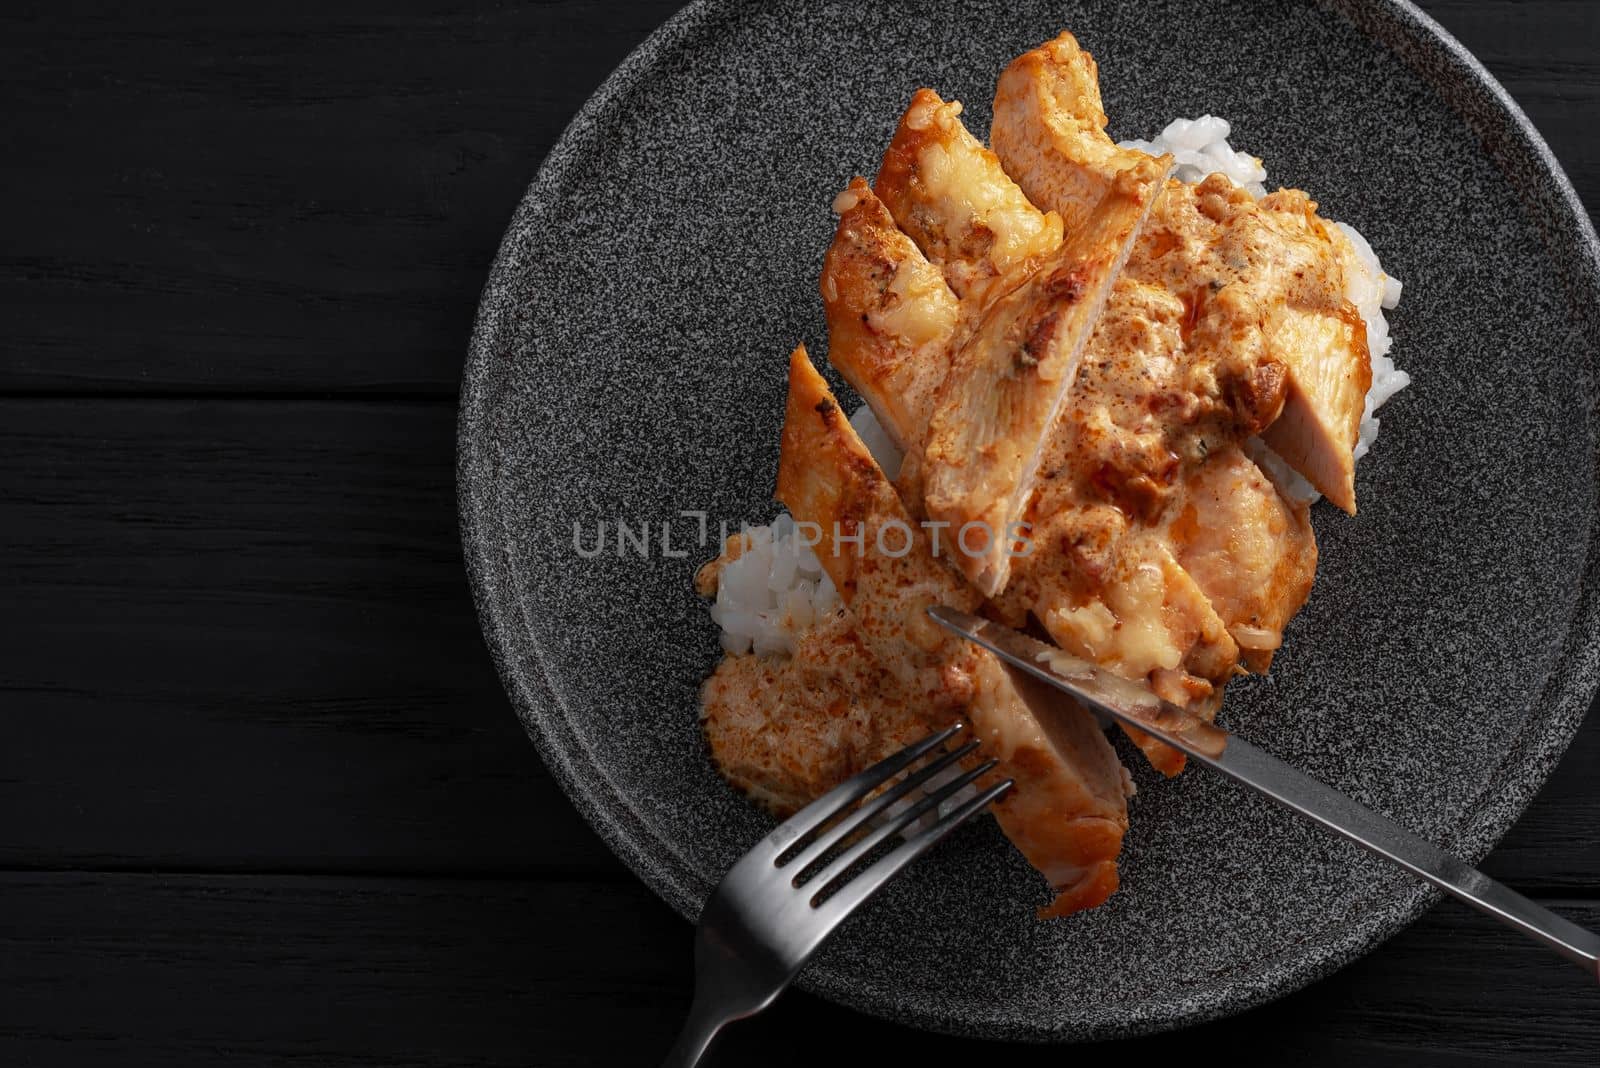 A man is eating an Indian dish. Hands holding knife and fork. Indian chicken with butter and basmati rice in a plate. .Black background. Place for text. Chicken in oil, a traditional Indian dish. Top view. Chicken tikka masala. Indian Cuisine.